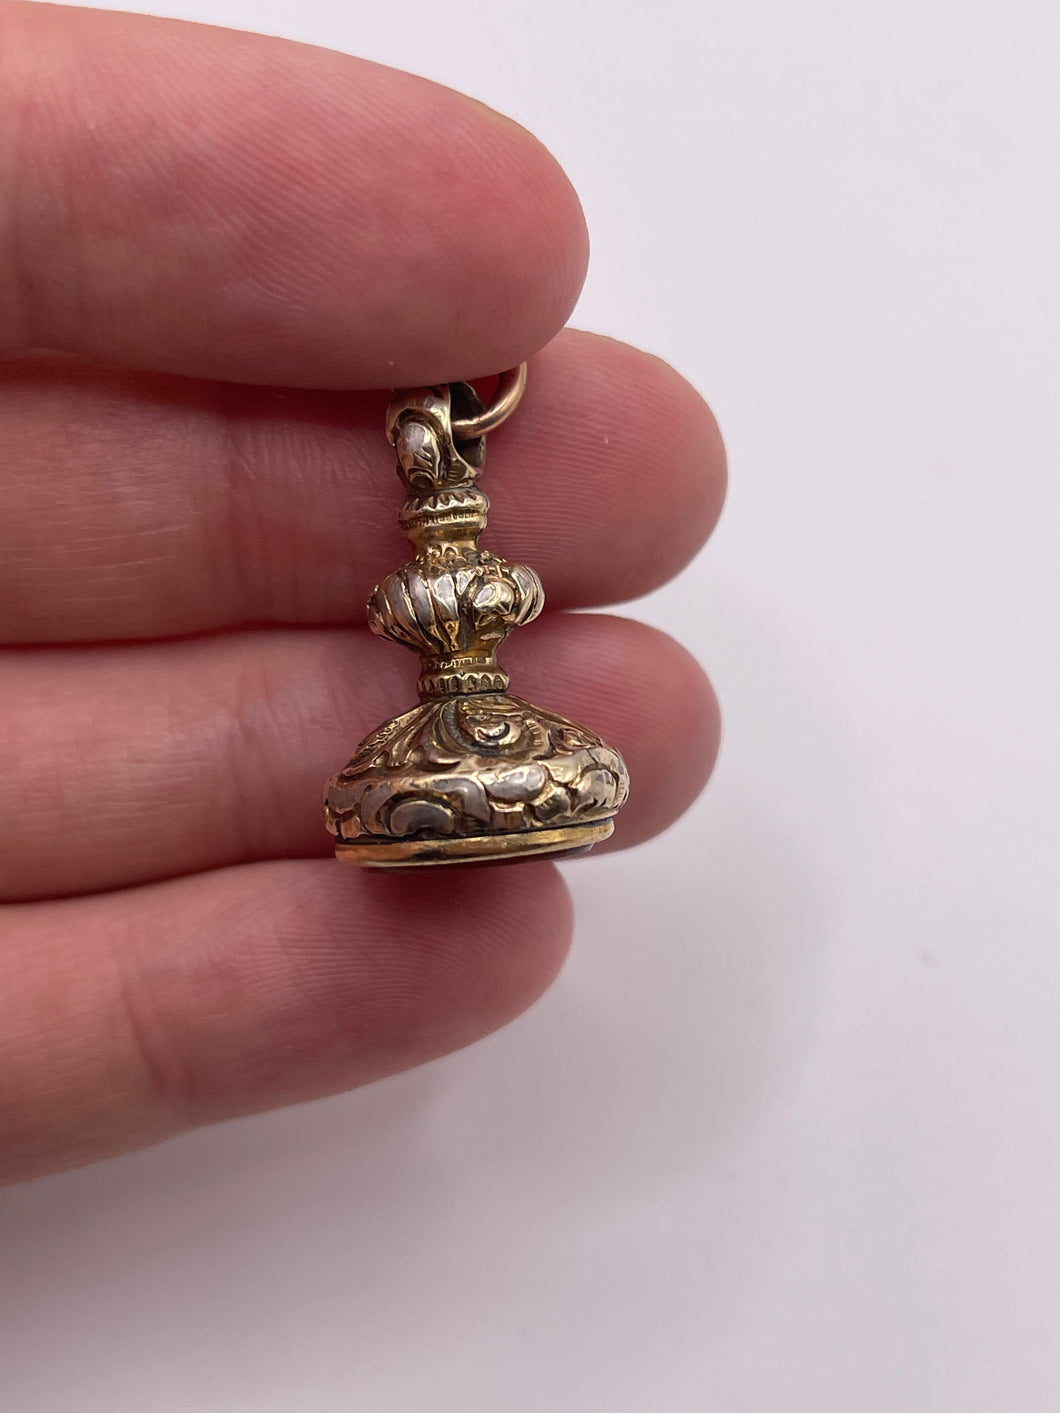 Antique rolled gold fob